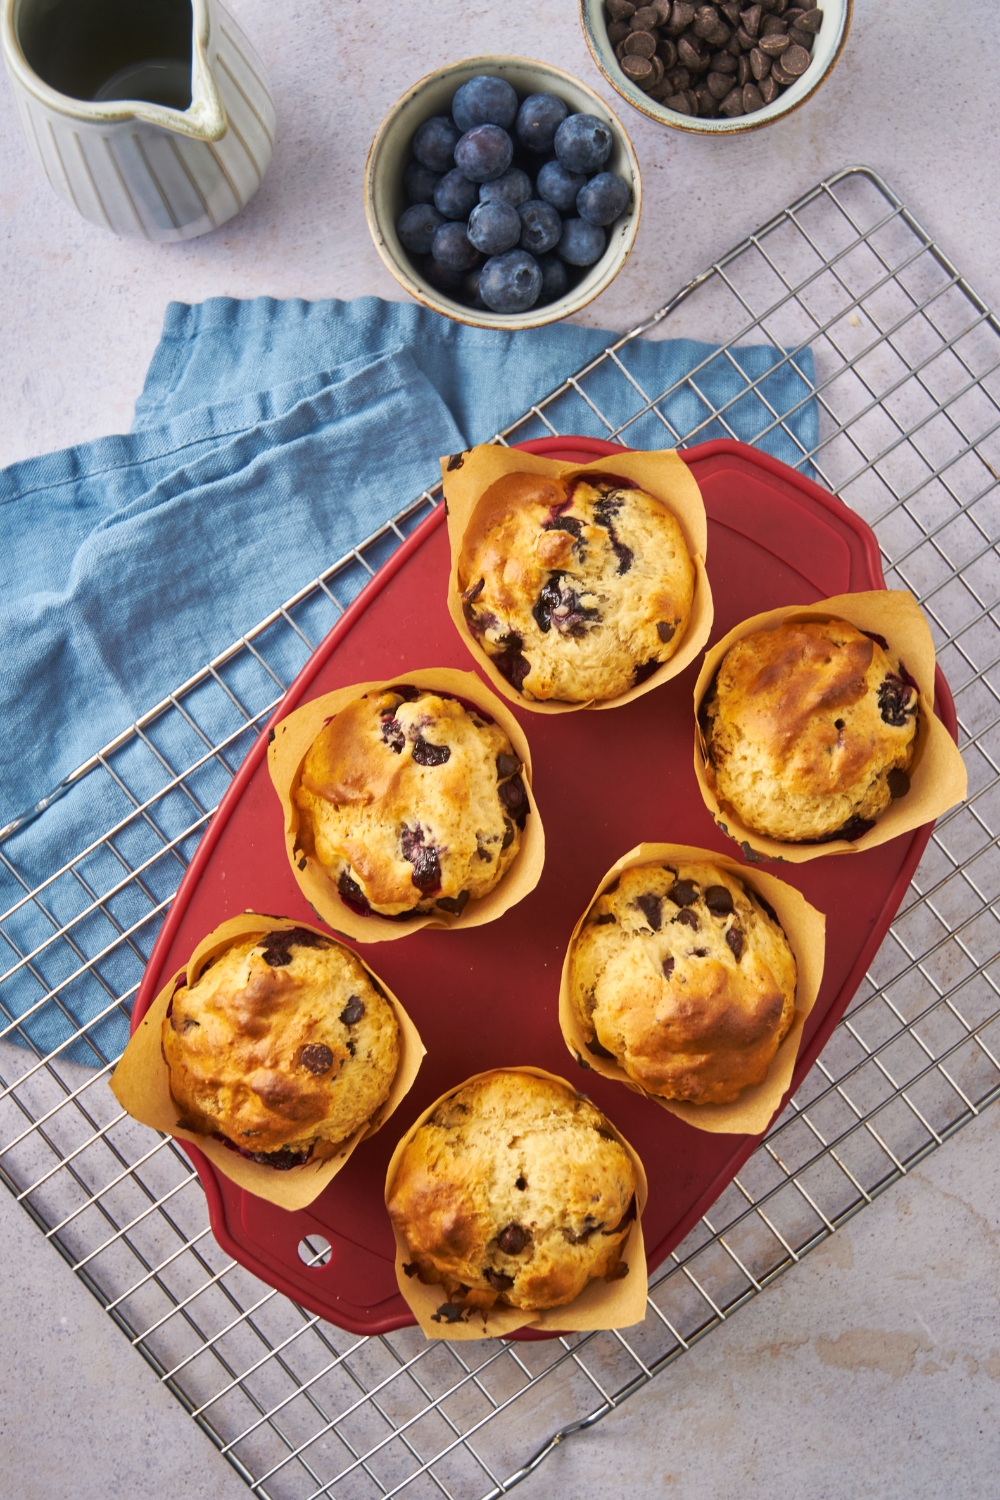 Six freshly baked chocolate chip and blueberry muffins on a red tray atop a wire rack.